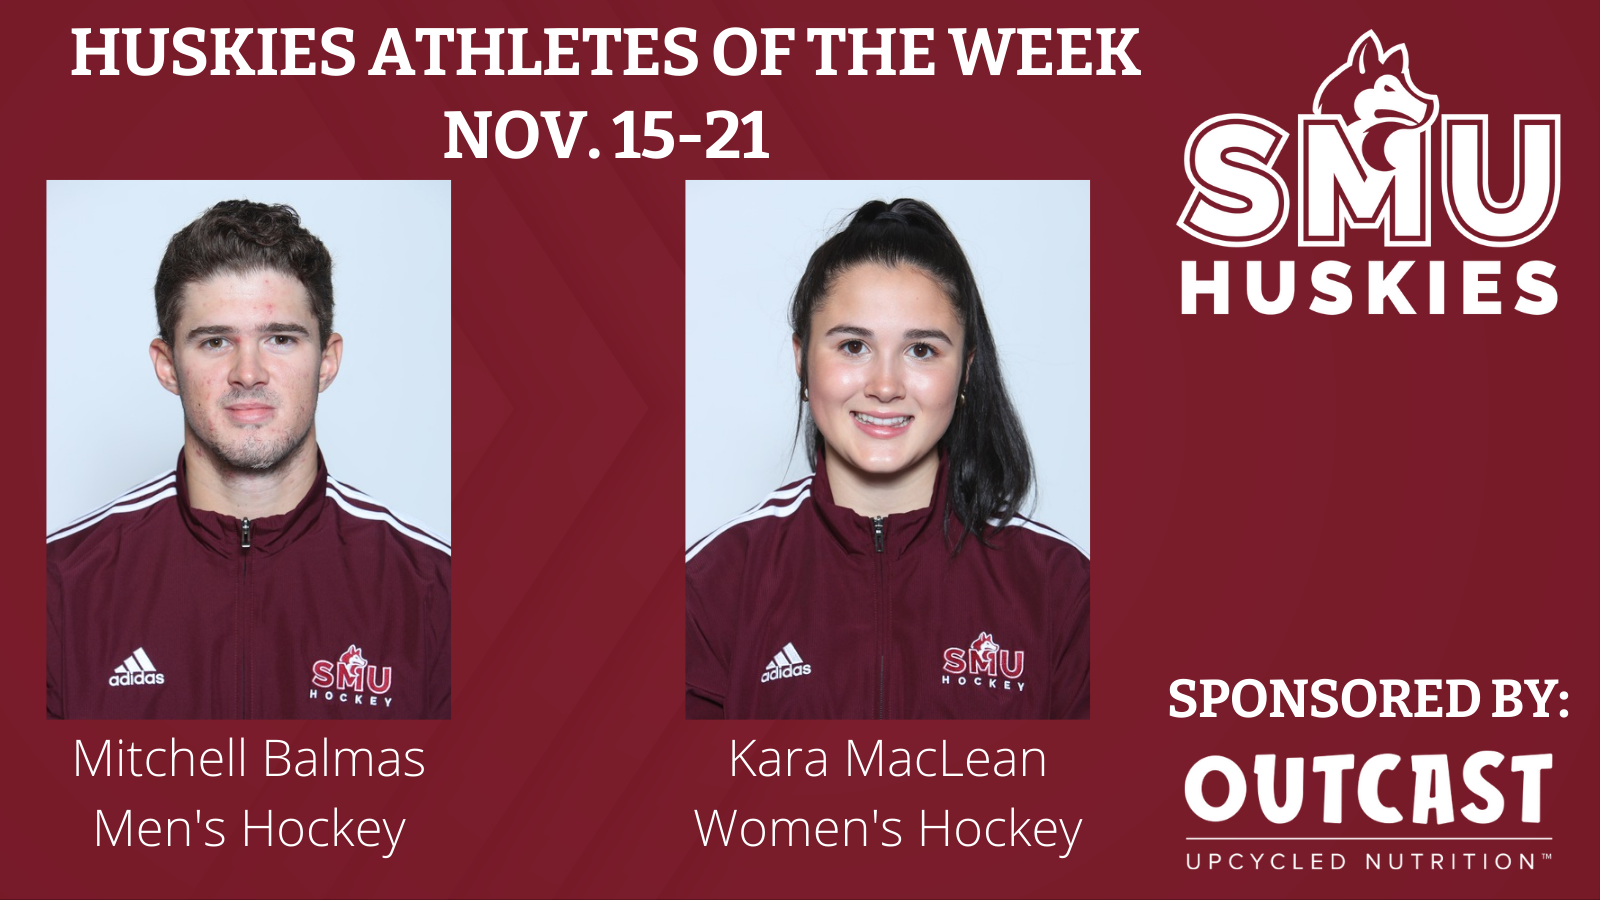 Huskies men's Hockey player Mitchell Balmas and women's hockey player Kara MacLean have been named Huskies Athlete of the Week, sponsored by Outcast Upcycled Nutrition.